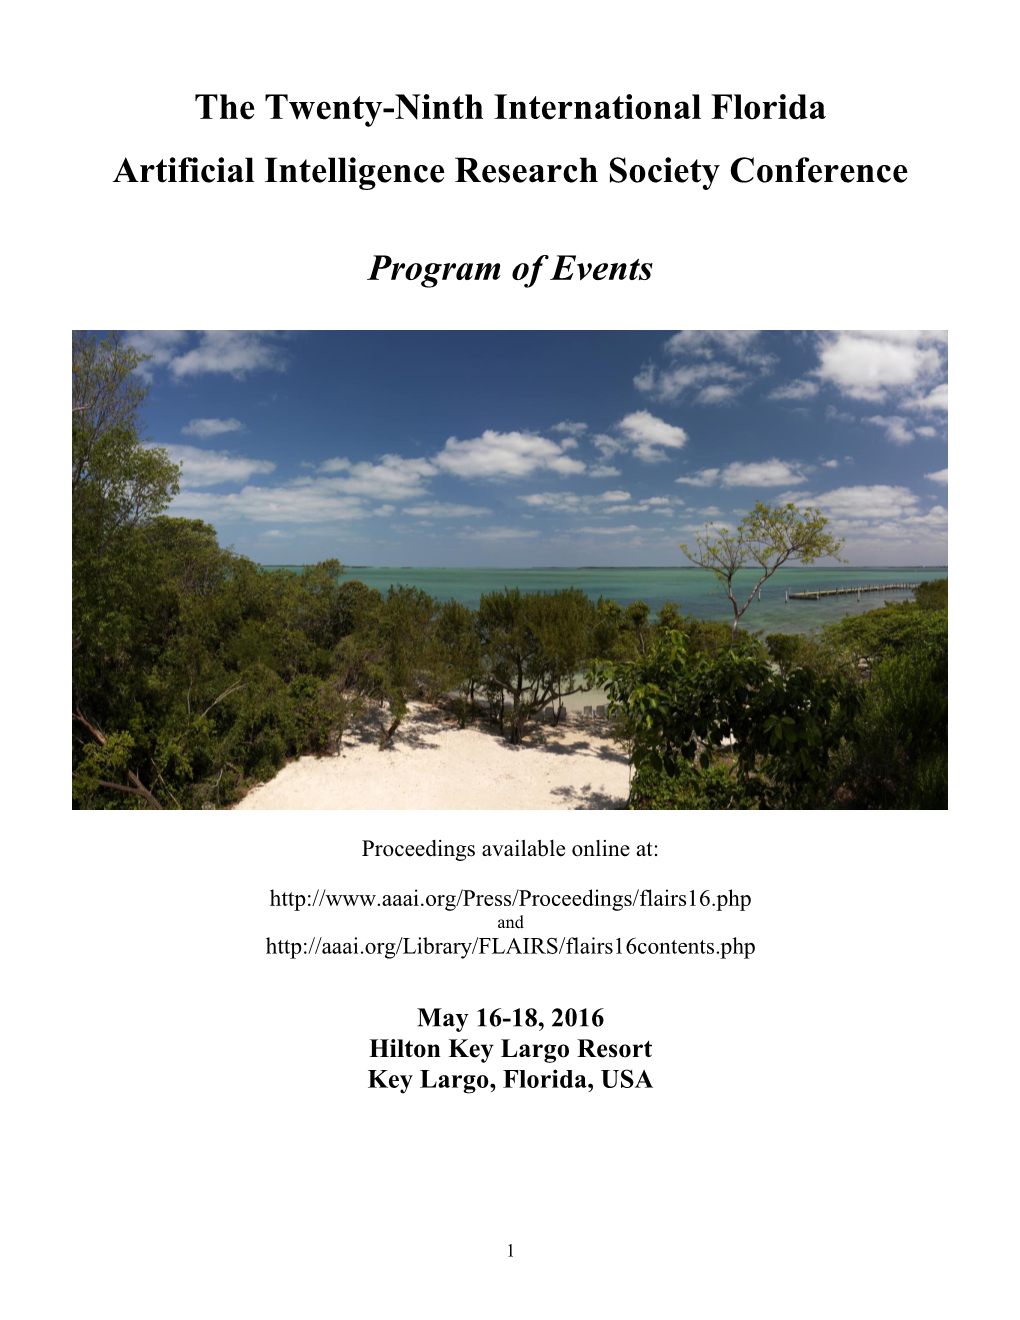 The Twenty-Ninth International Florida Artificial Intelligence Research Society Conference Program of Events